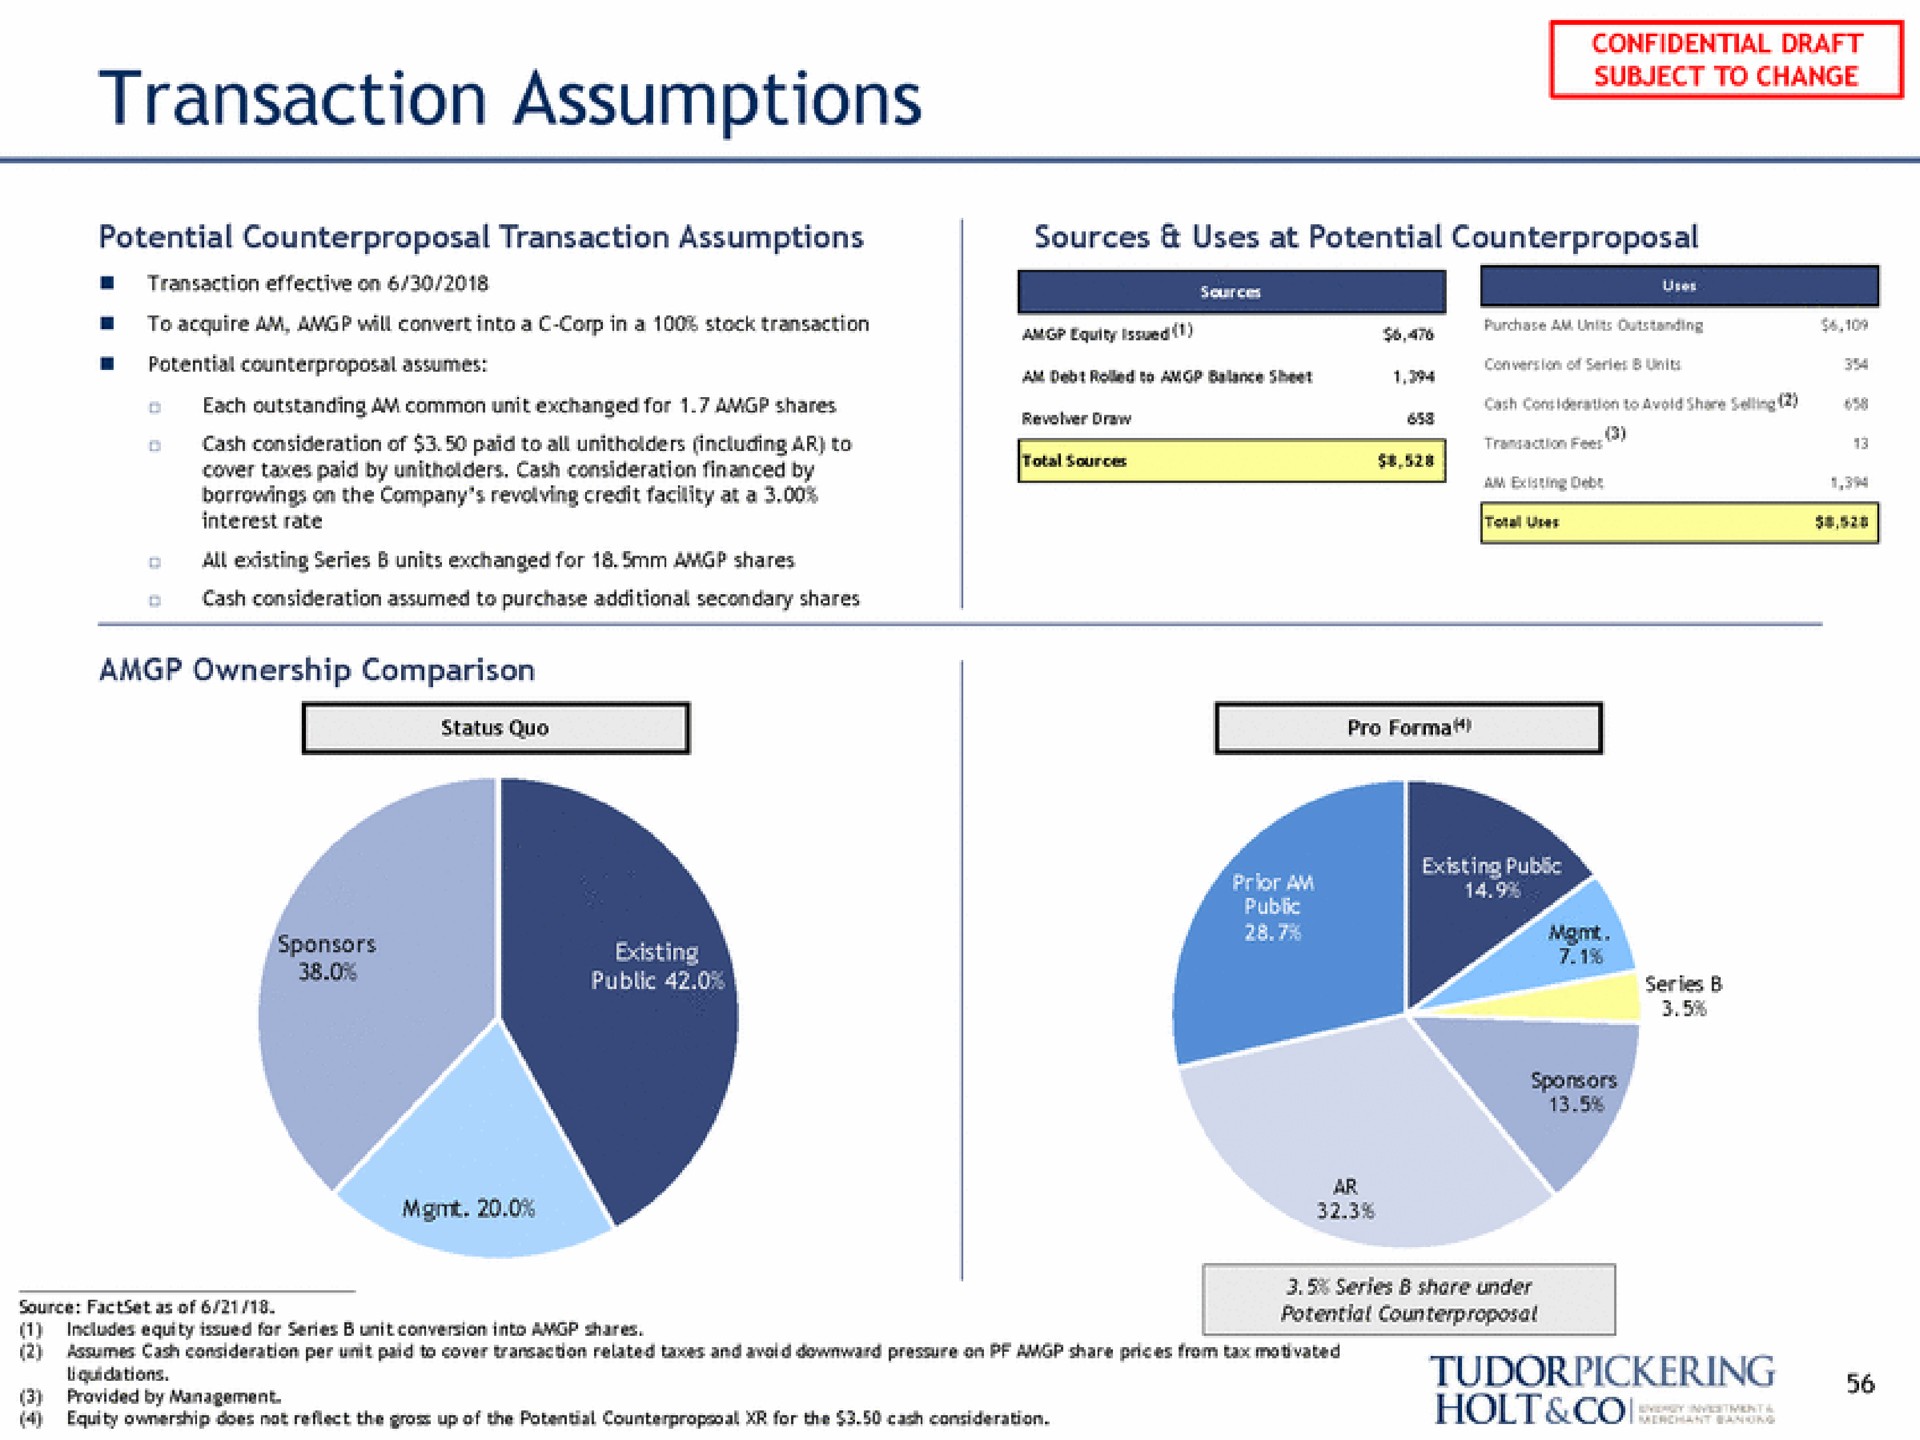 transaction assumptions cover taxes by cash consideration financed by a so | Tudor, Pickering, Holt & Co